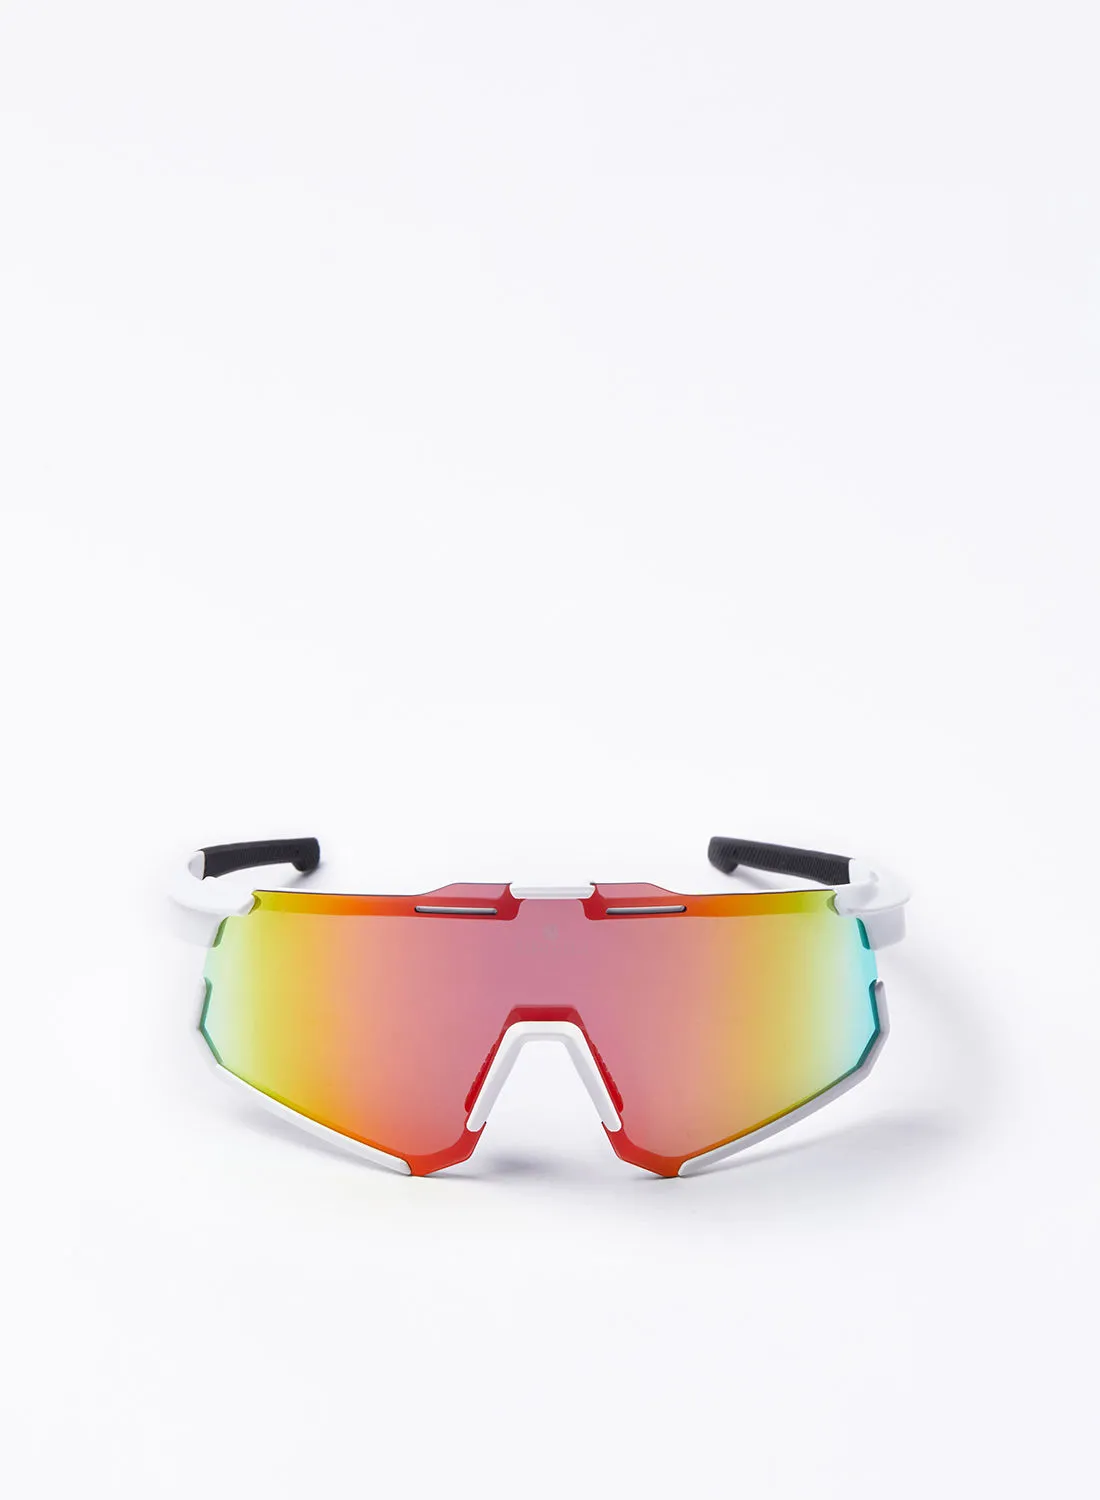 Athletiq Cycling Scooter Sunglasses - Athletiq Club Jabal Sawda - White Frame With Red Fire Multilayer Mirror Lens